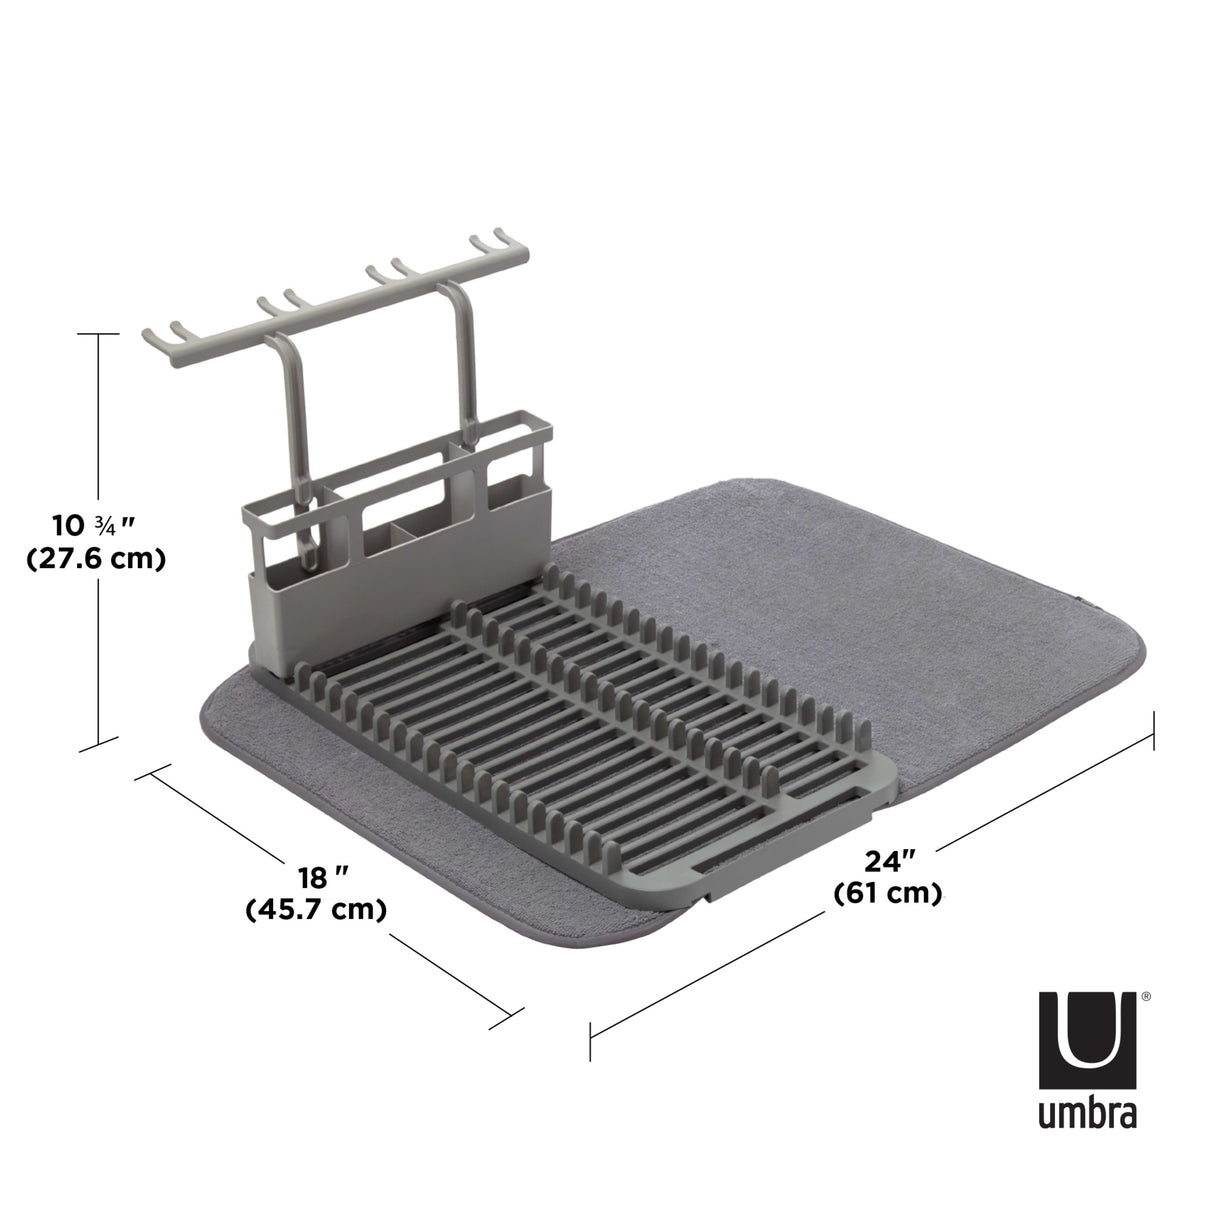 UDRY Drying Rack and Microfiber Dish Mat 24x18 - LINEN by Umbra